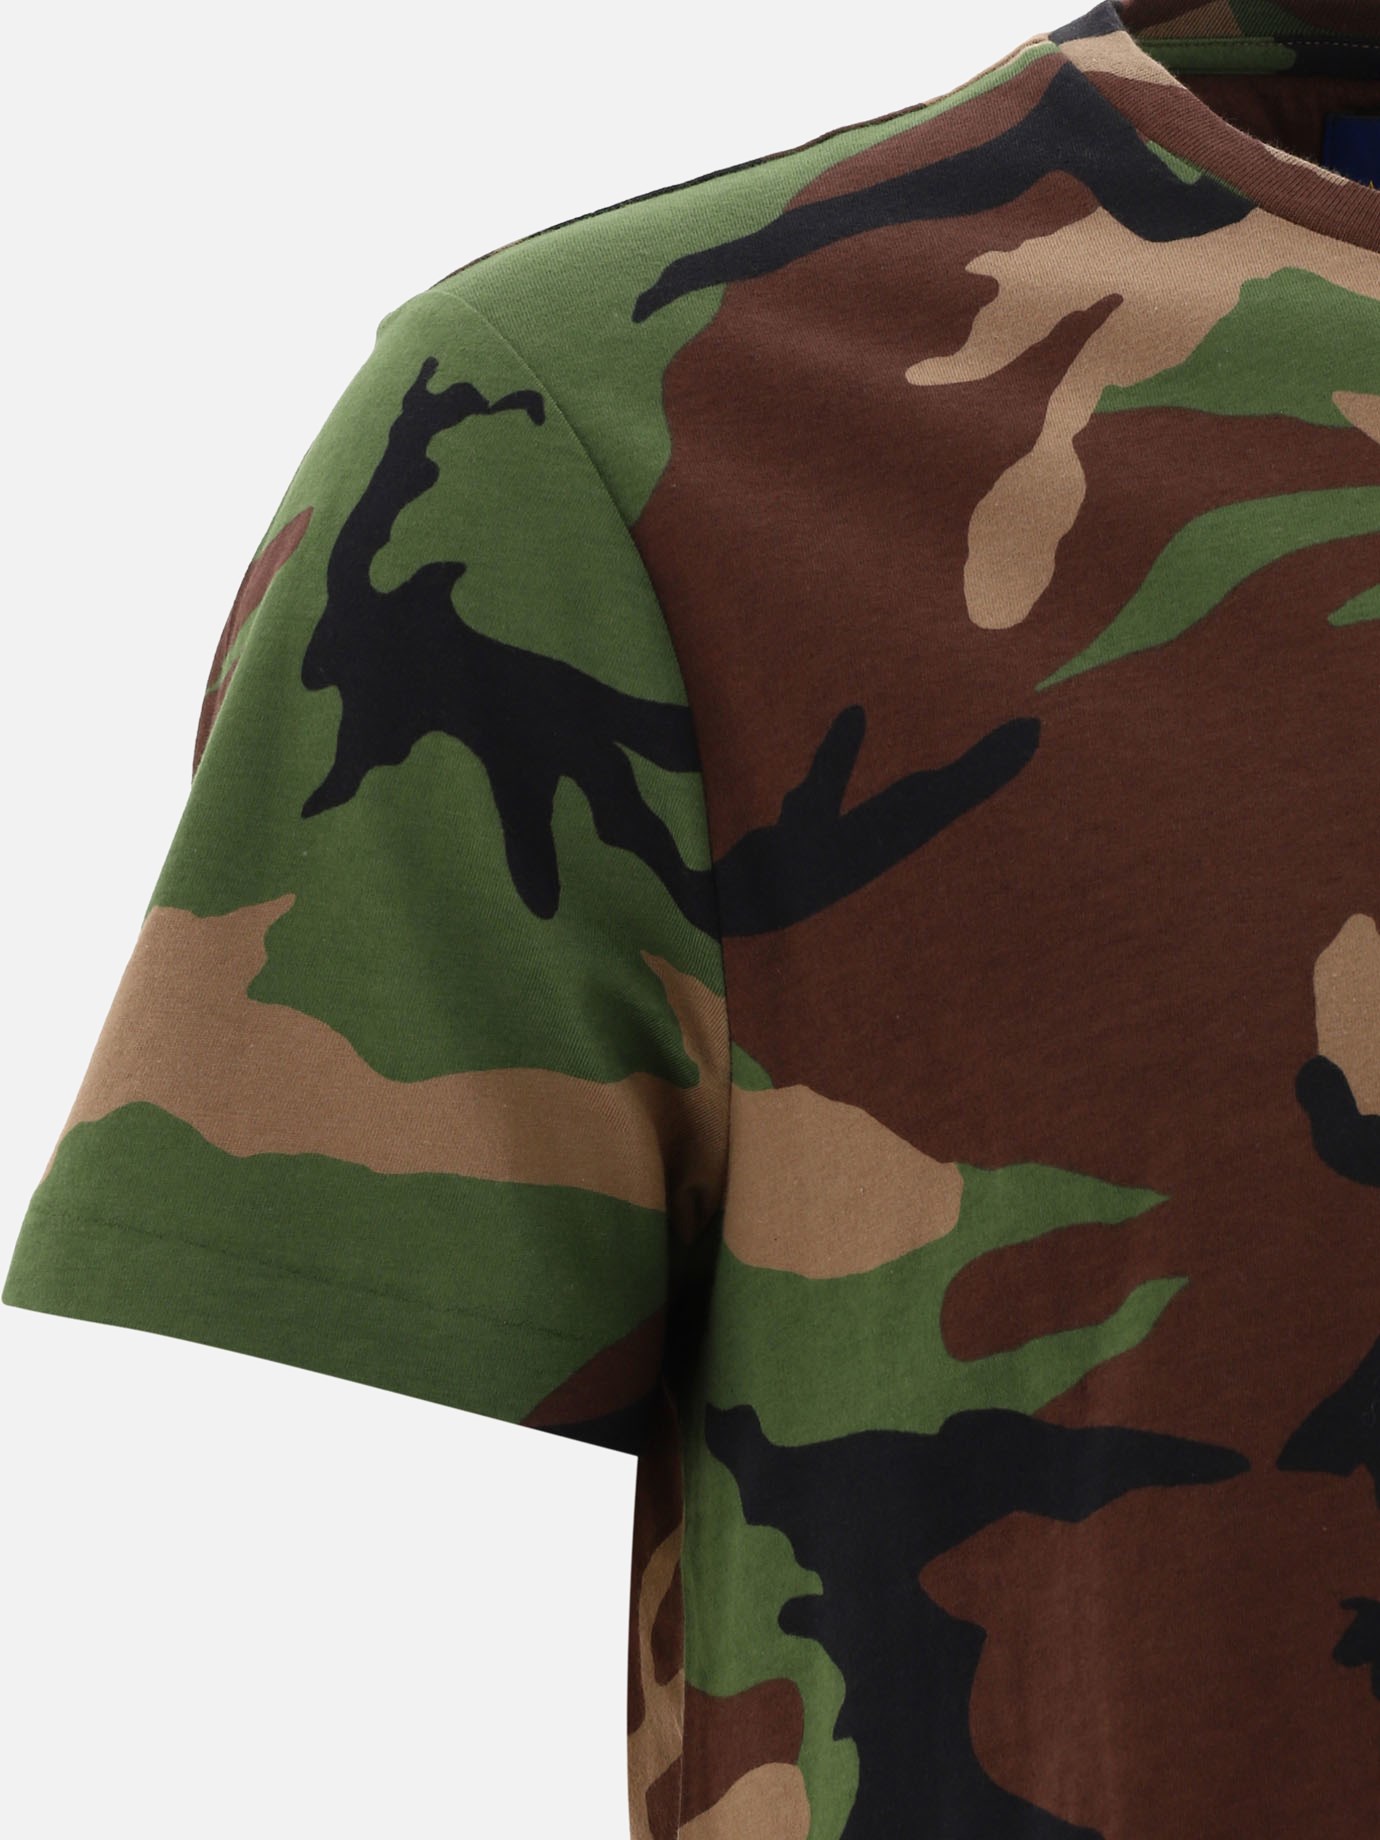  Pony  camouflage t-shirt by Polo Ralph Lauren